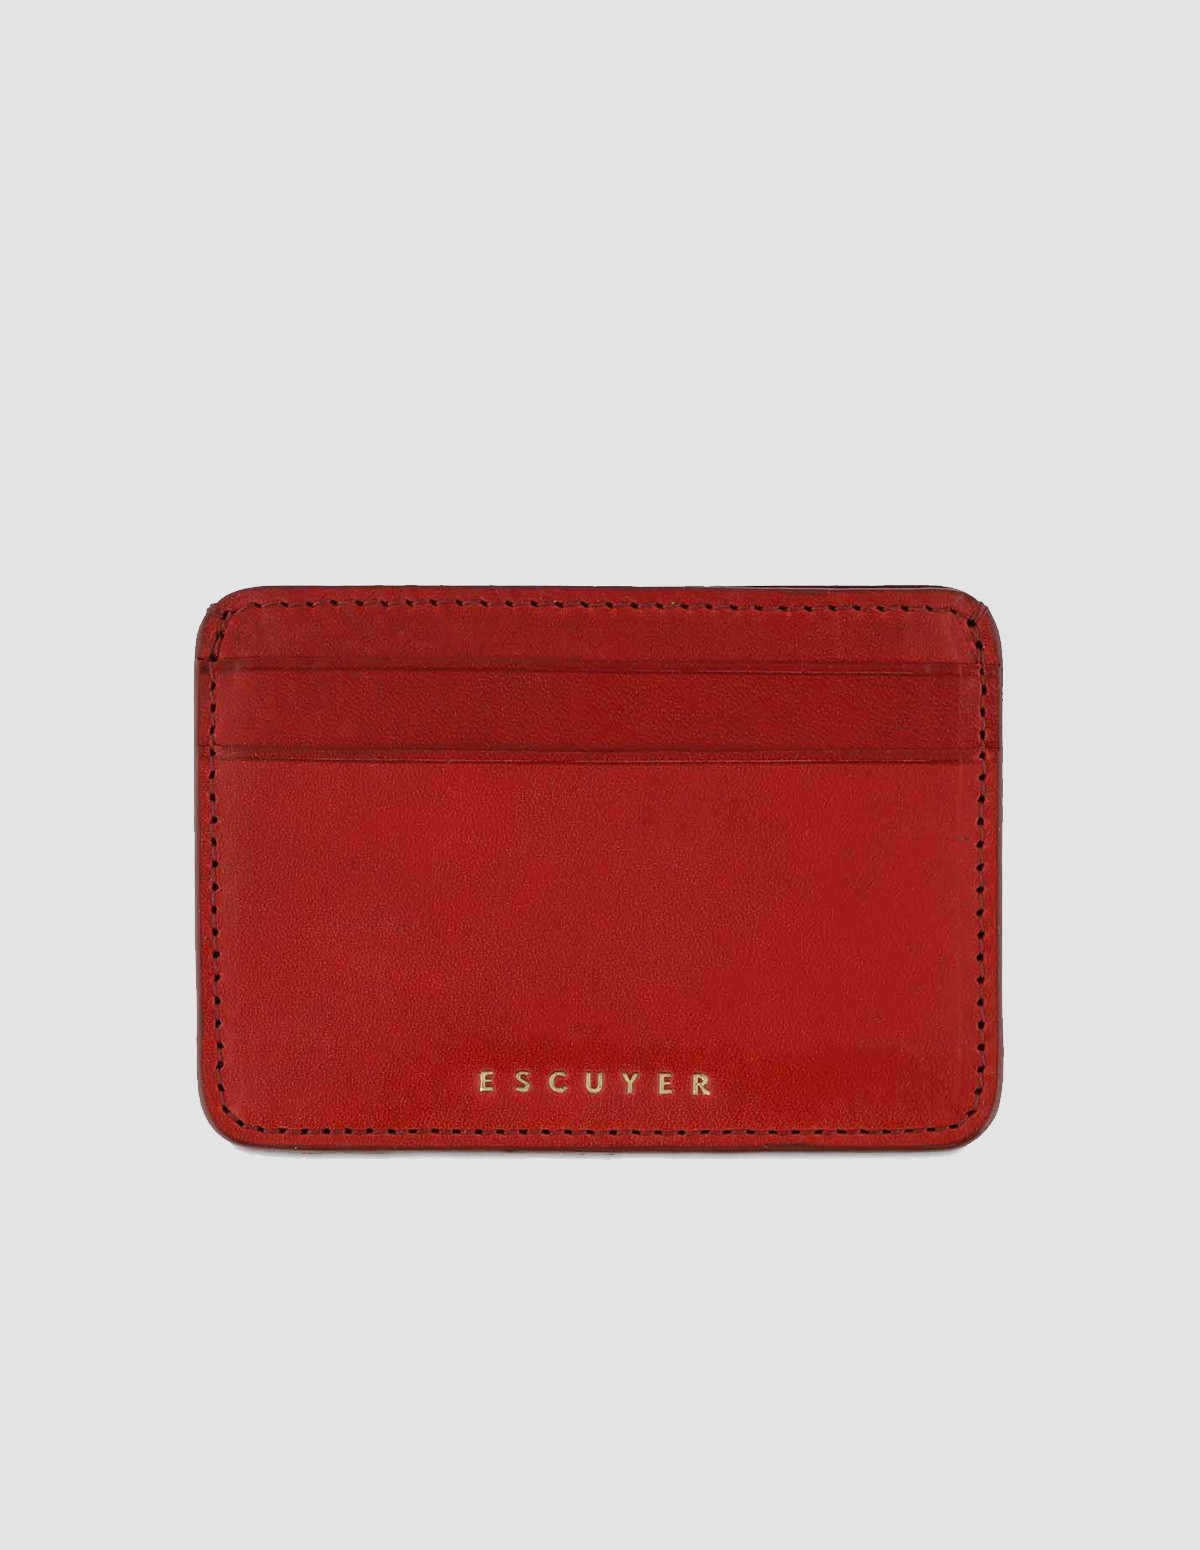 Escuyer Cardholder - RED